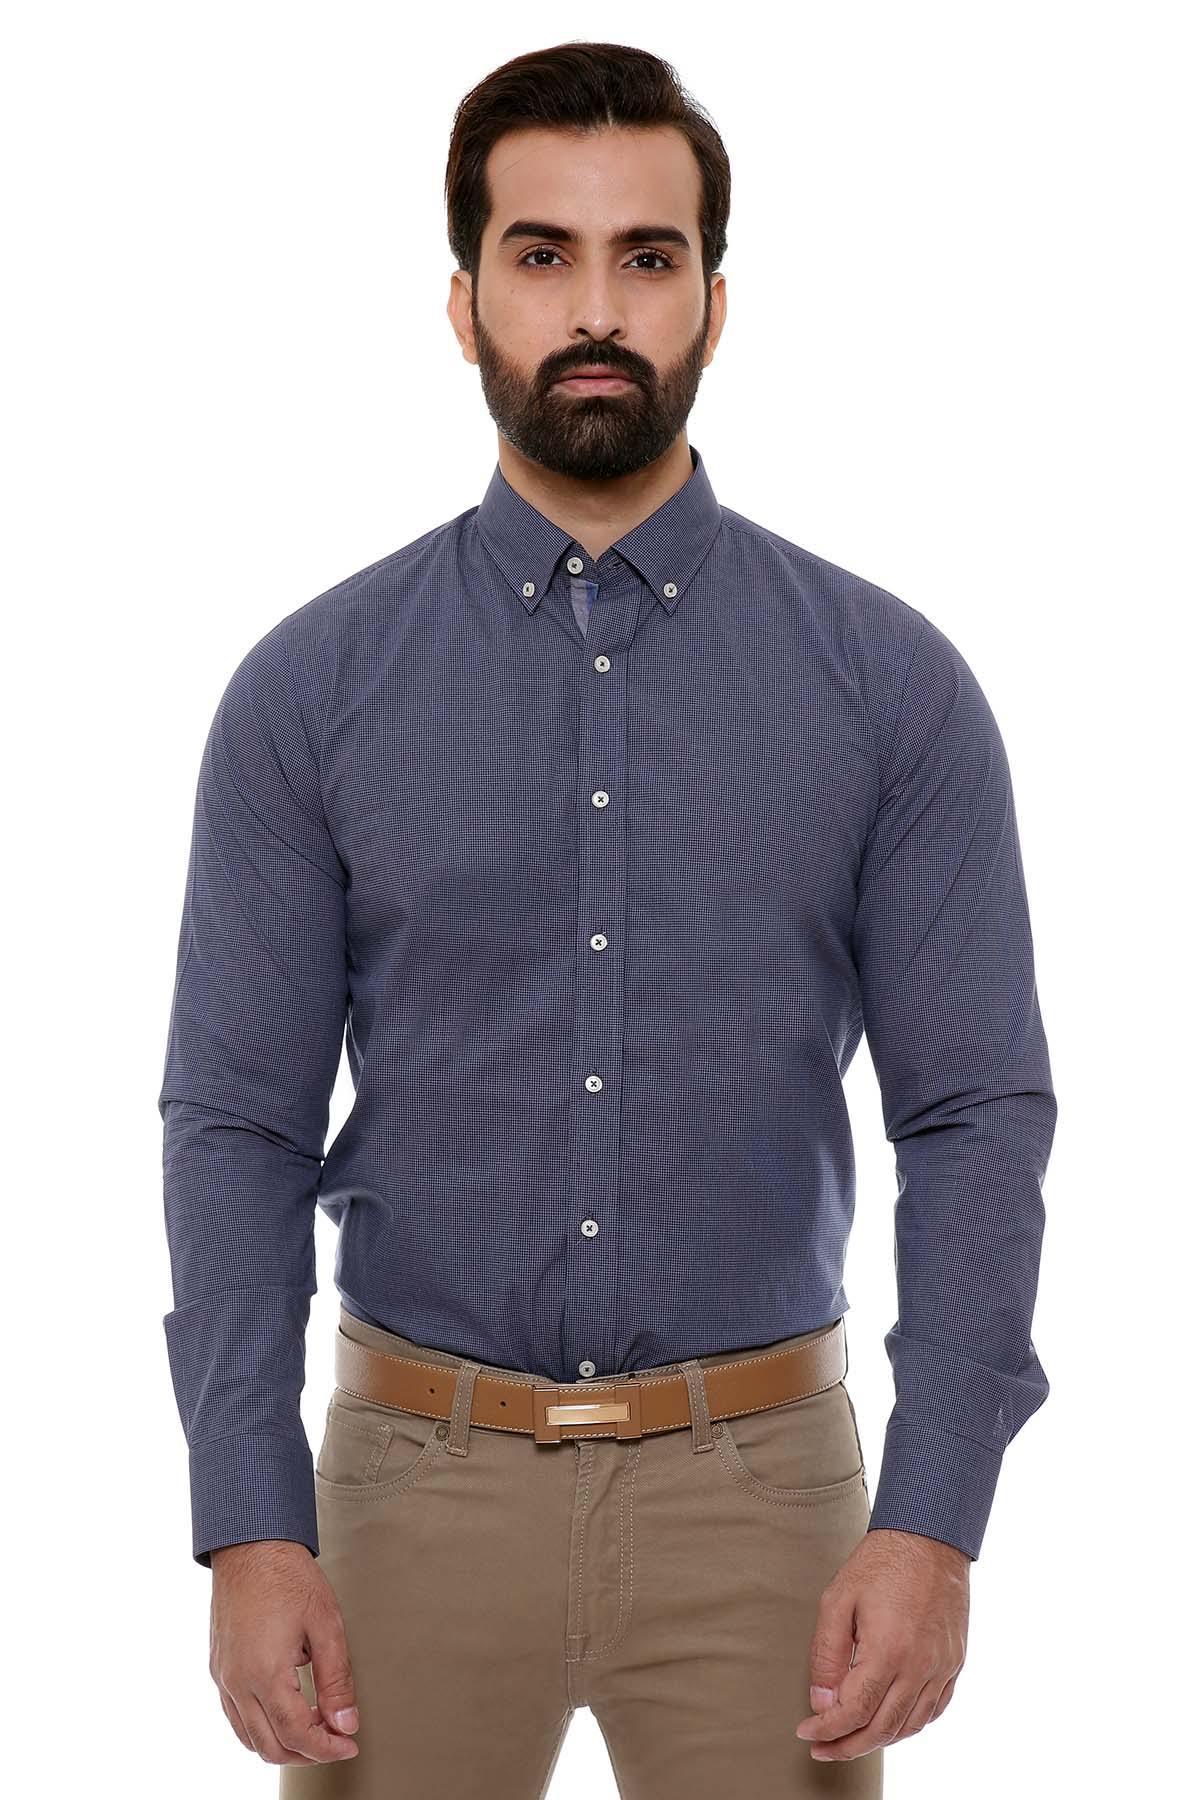 SEMI FORMAL SHIRTS BUTTON DOWN FULL SLEEVE NAVY SKY CHECK at Charcoal Clothing